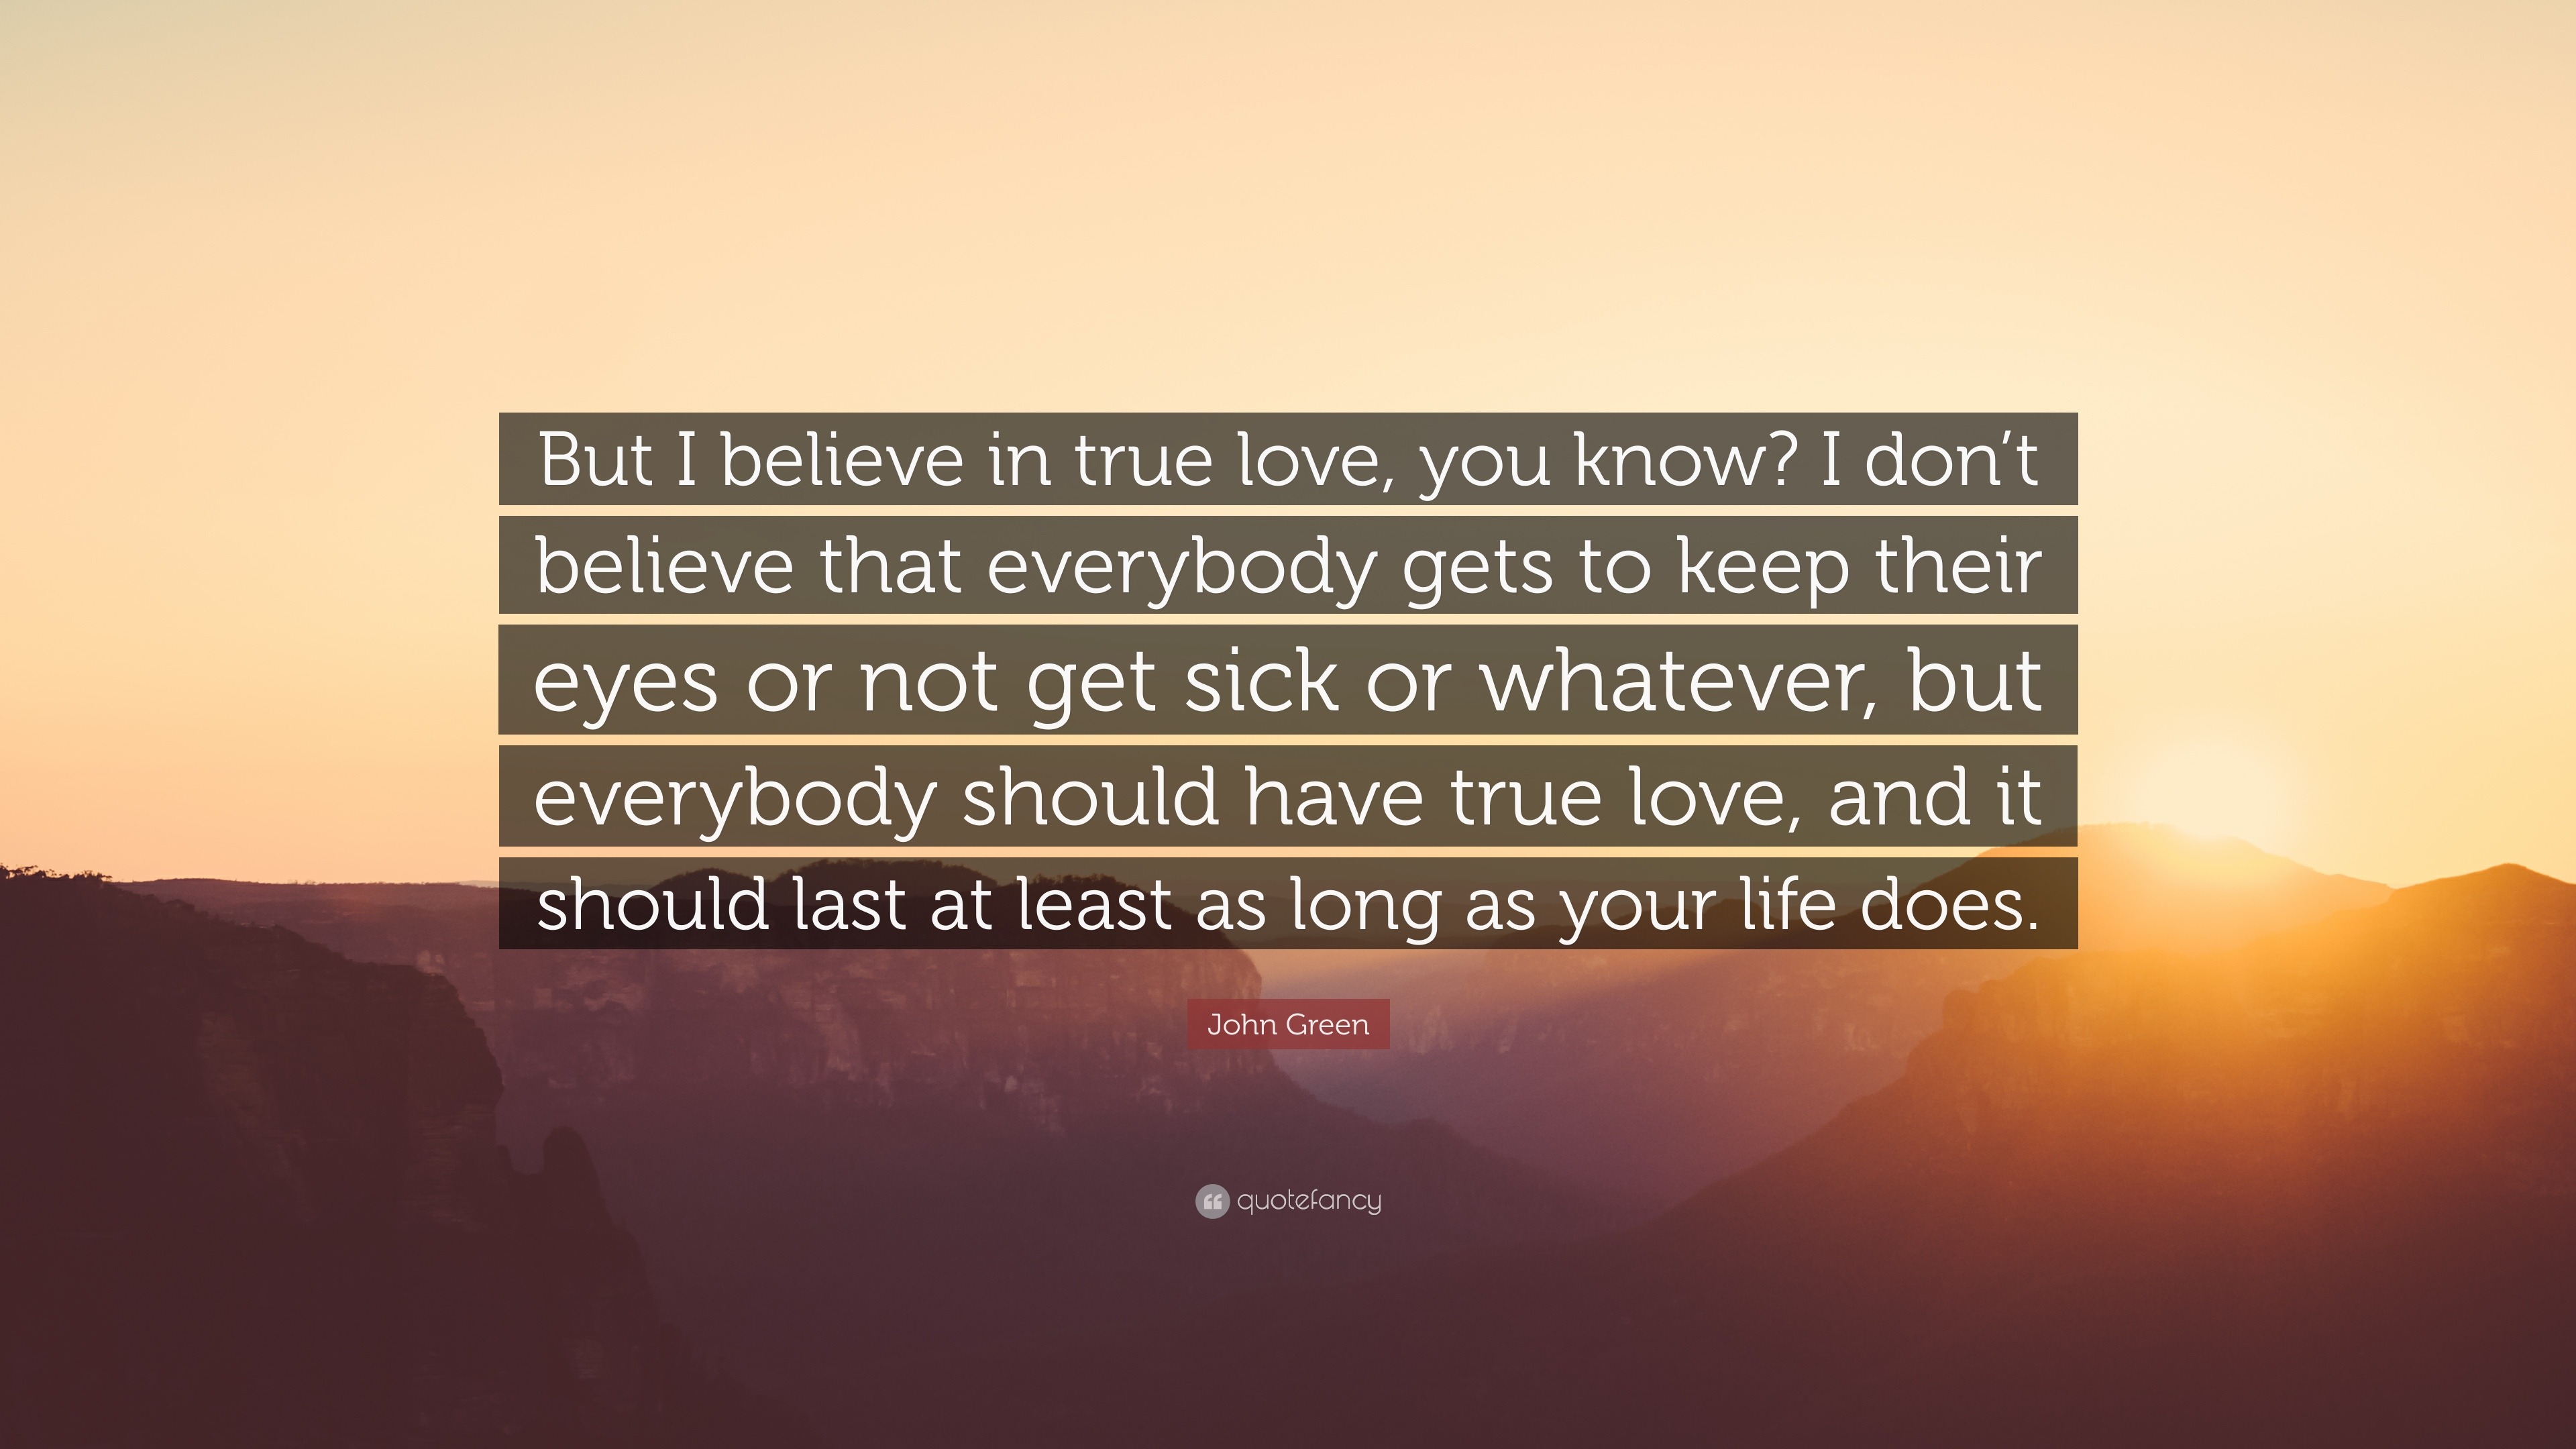 John Green Quote “But I believe in true love you know I